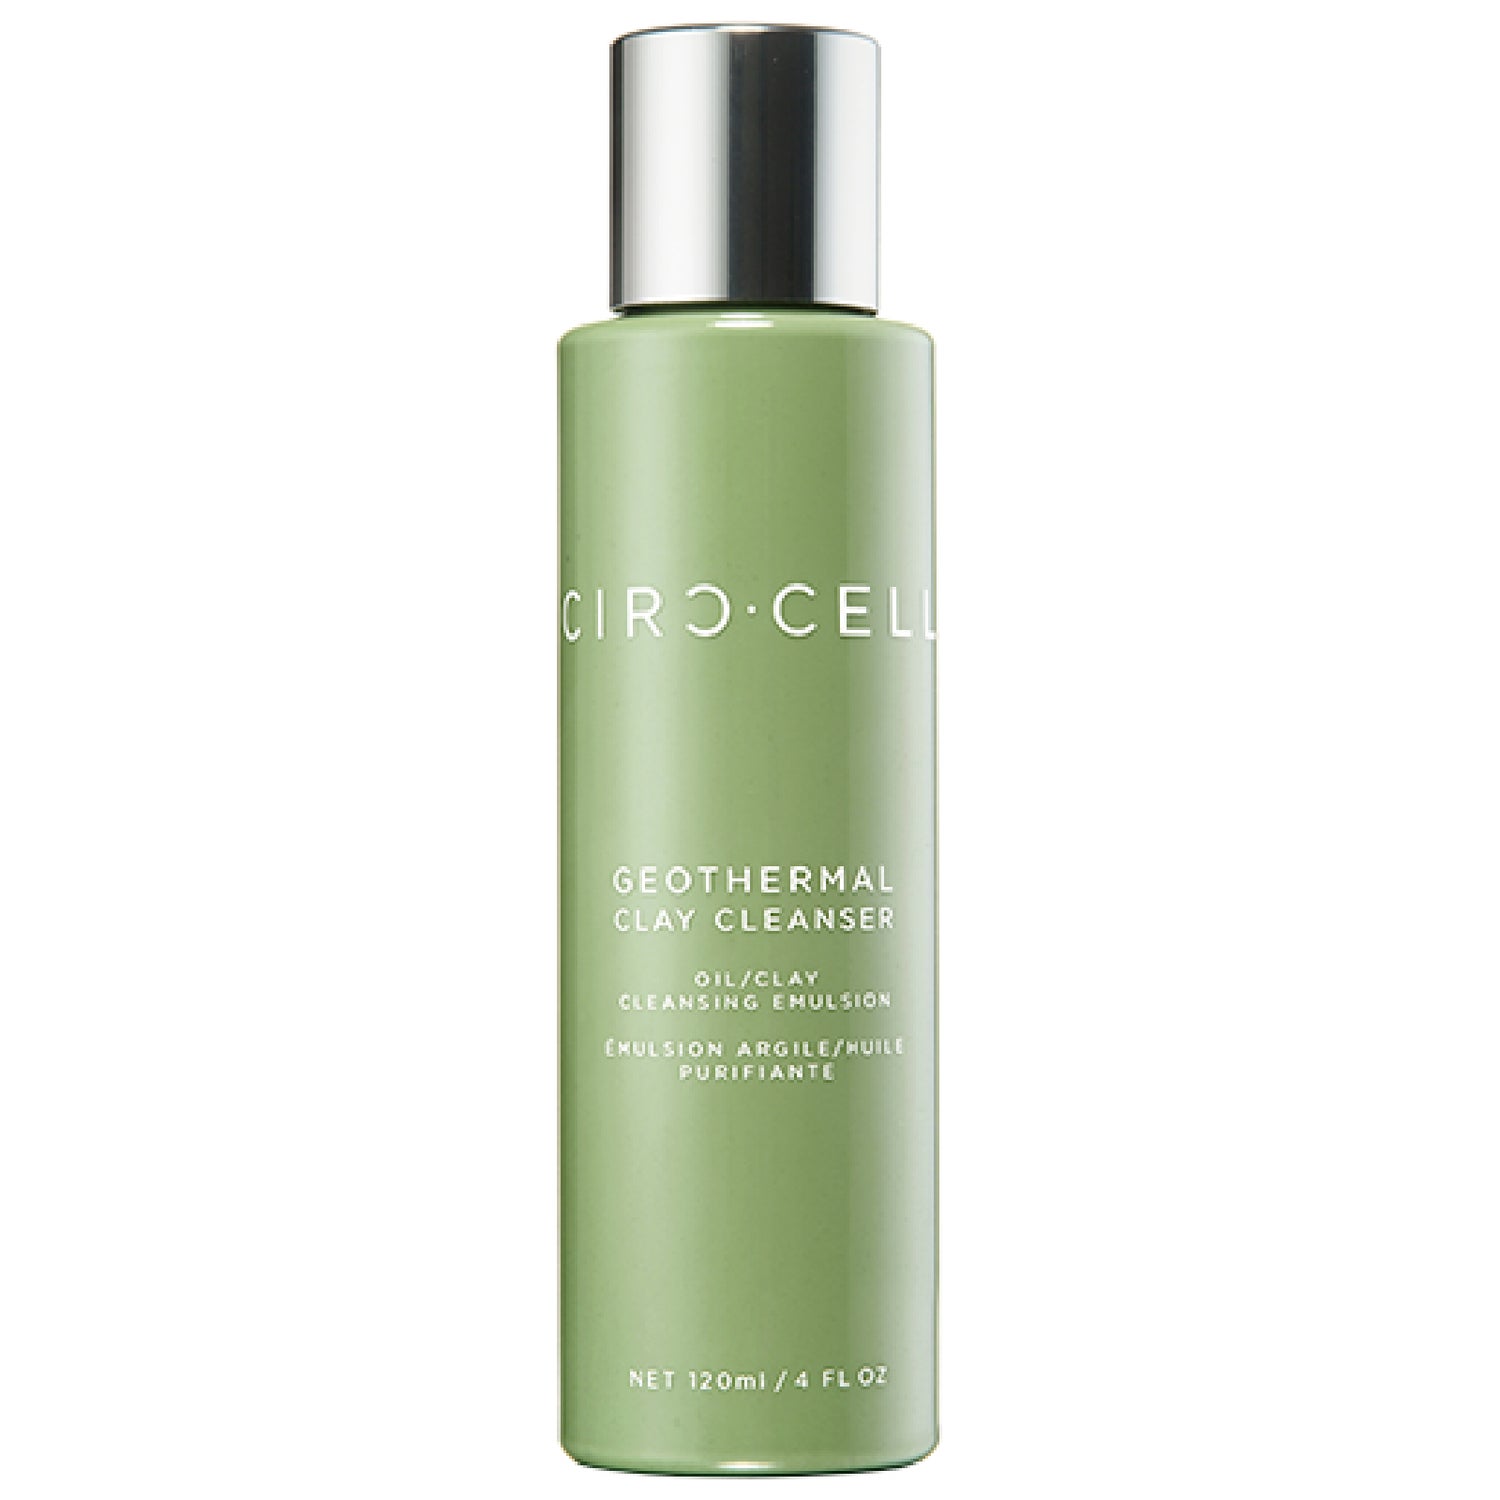 Circ-Cell Geothermal Clay Cleanser